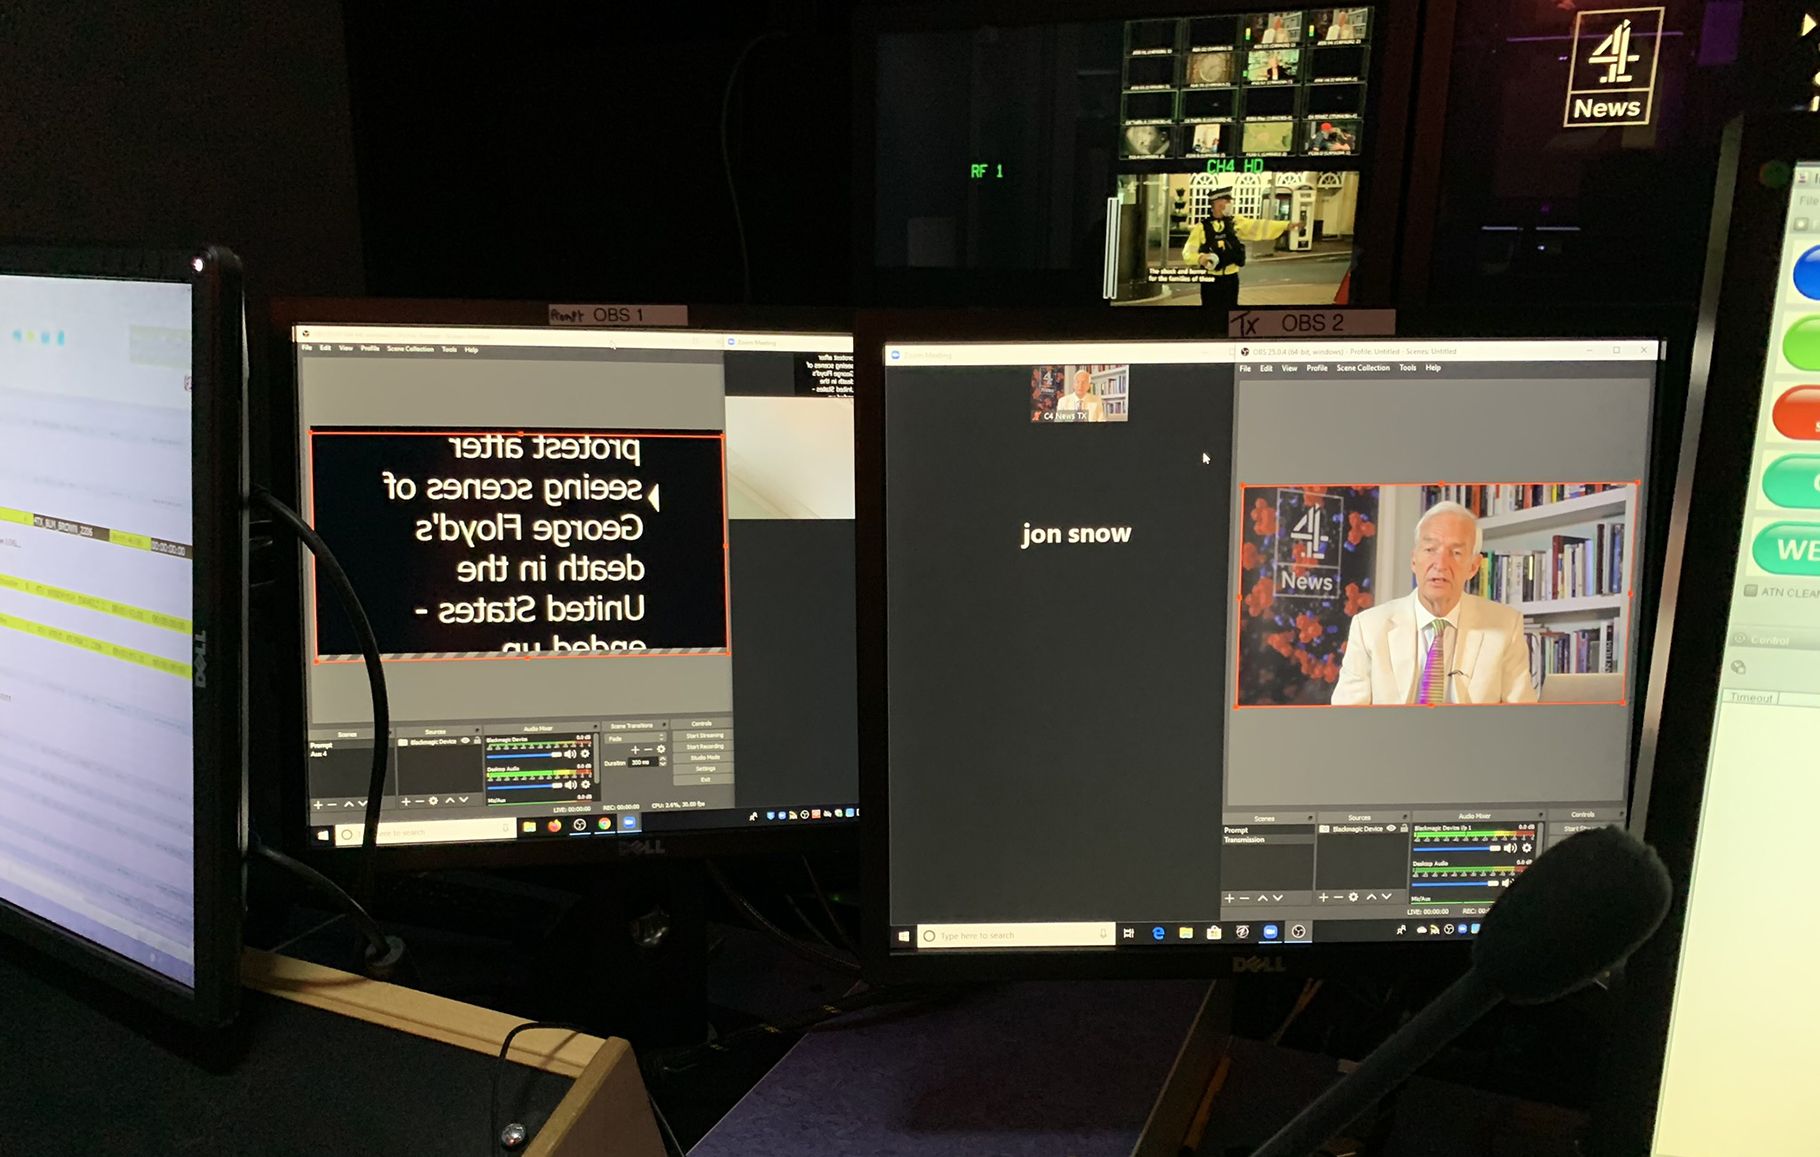 UK Based Channel 4 News Uses Zoom To Create A Seamless Broadcast Experience During COVID 19